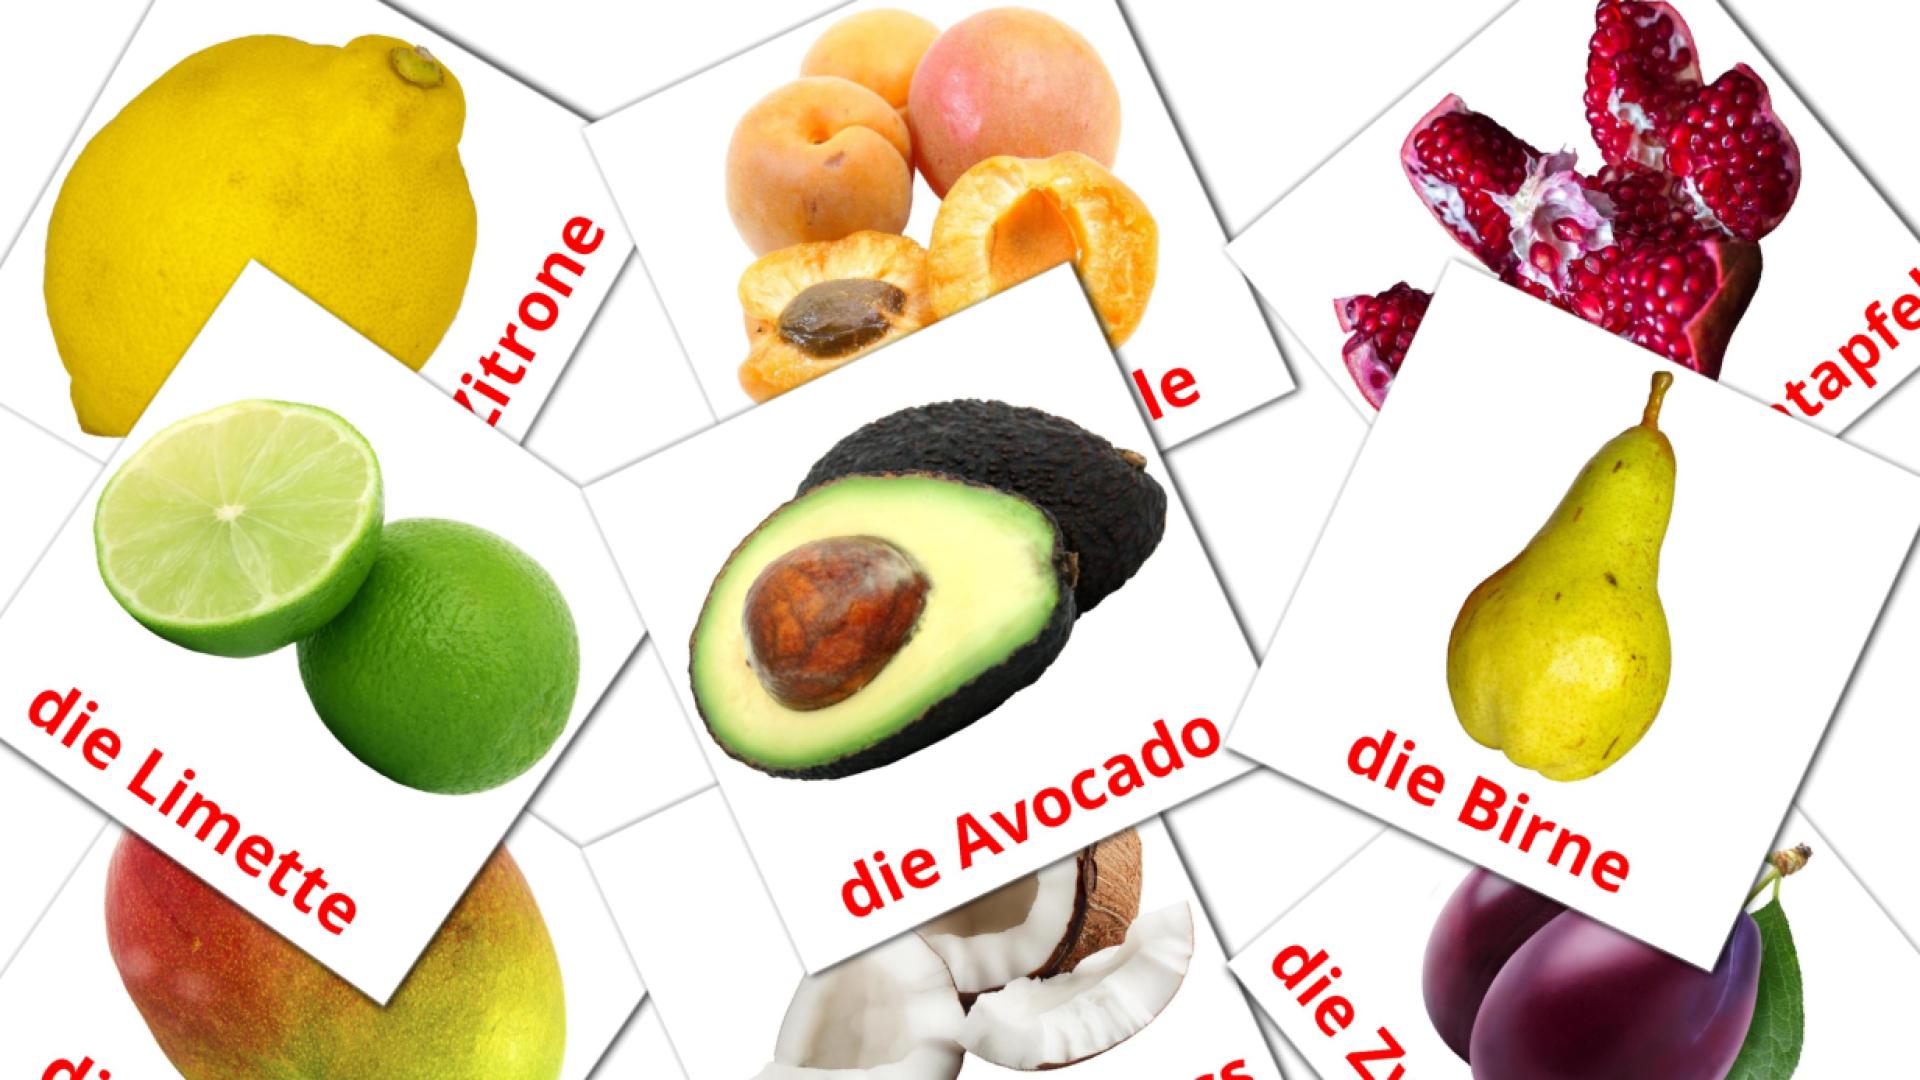 Obst flashcards